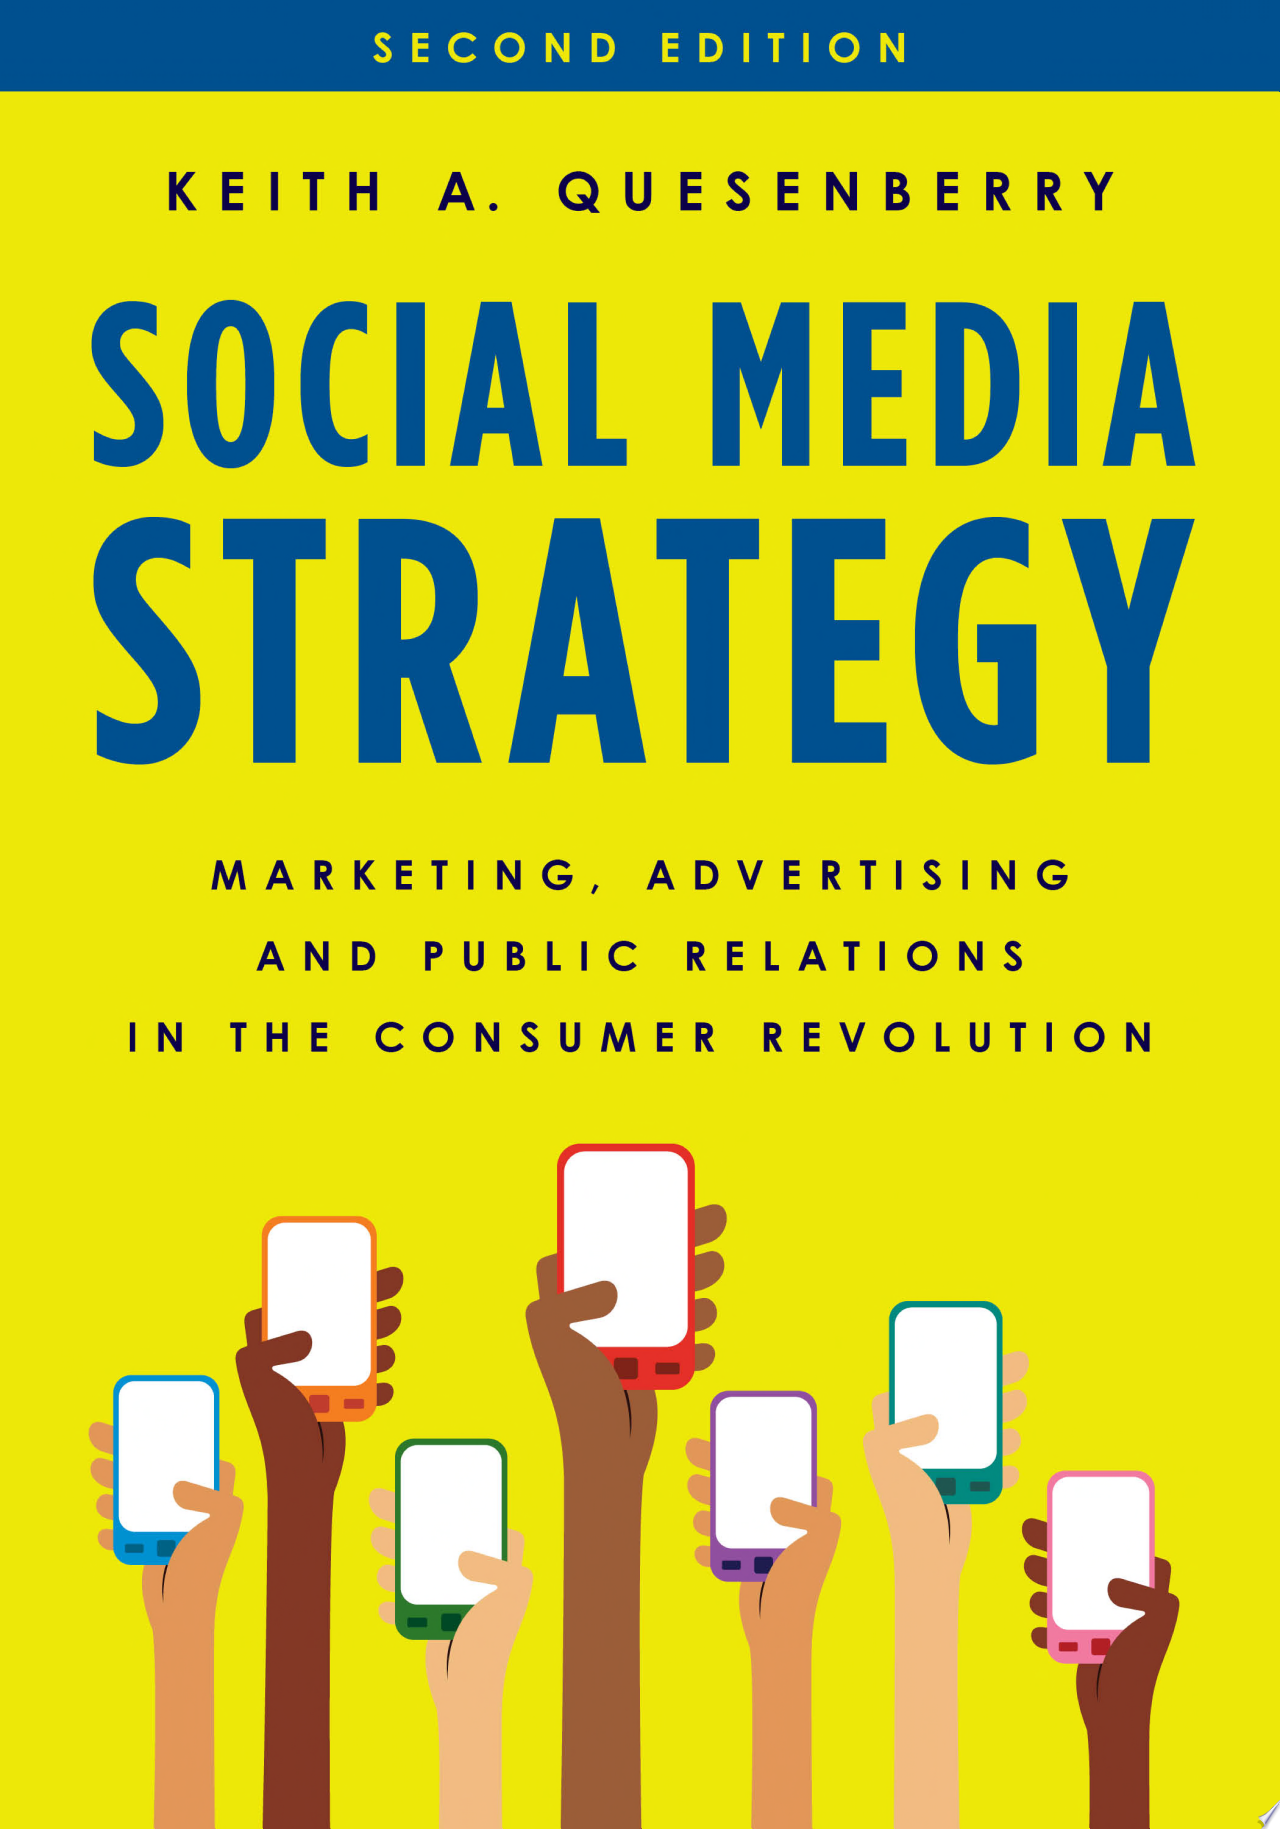 Image for "Social Media Strategy"